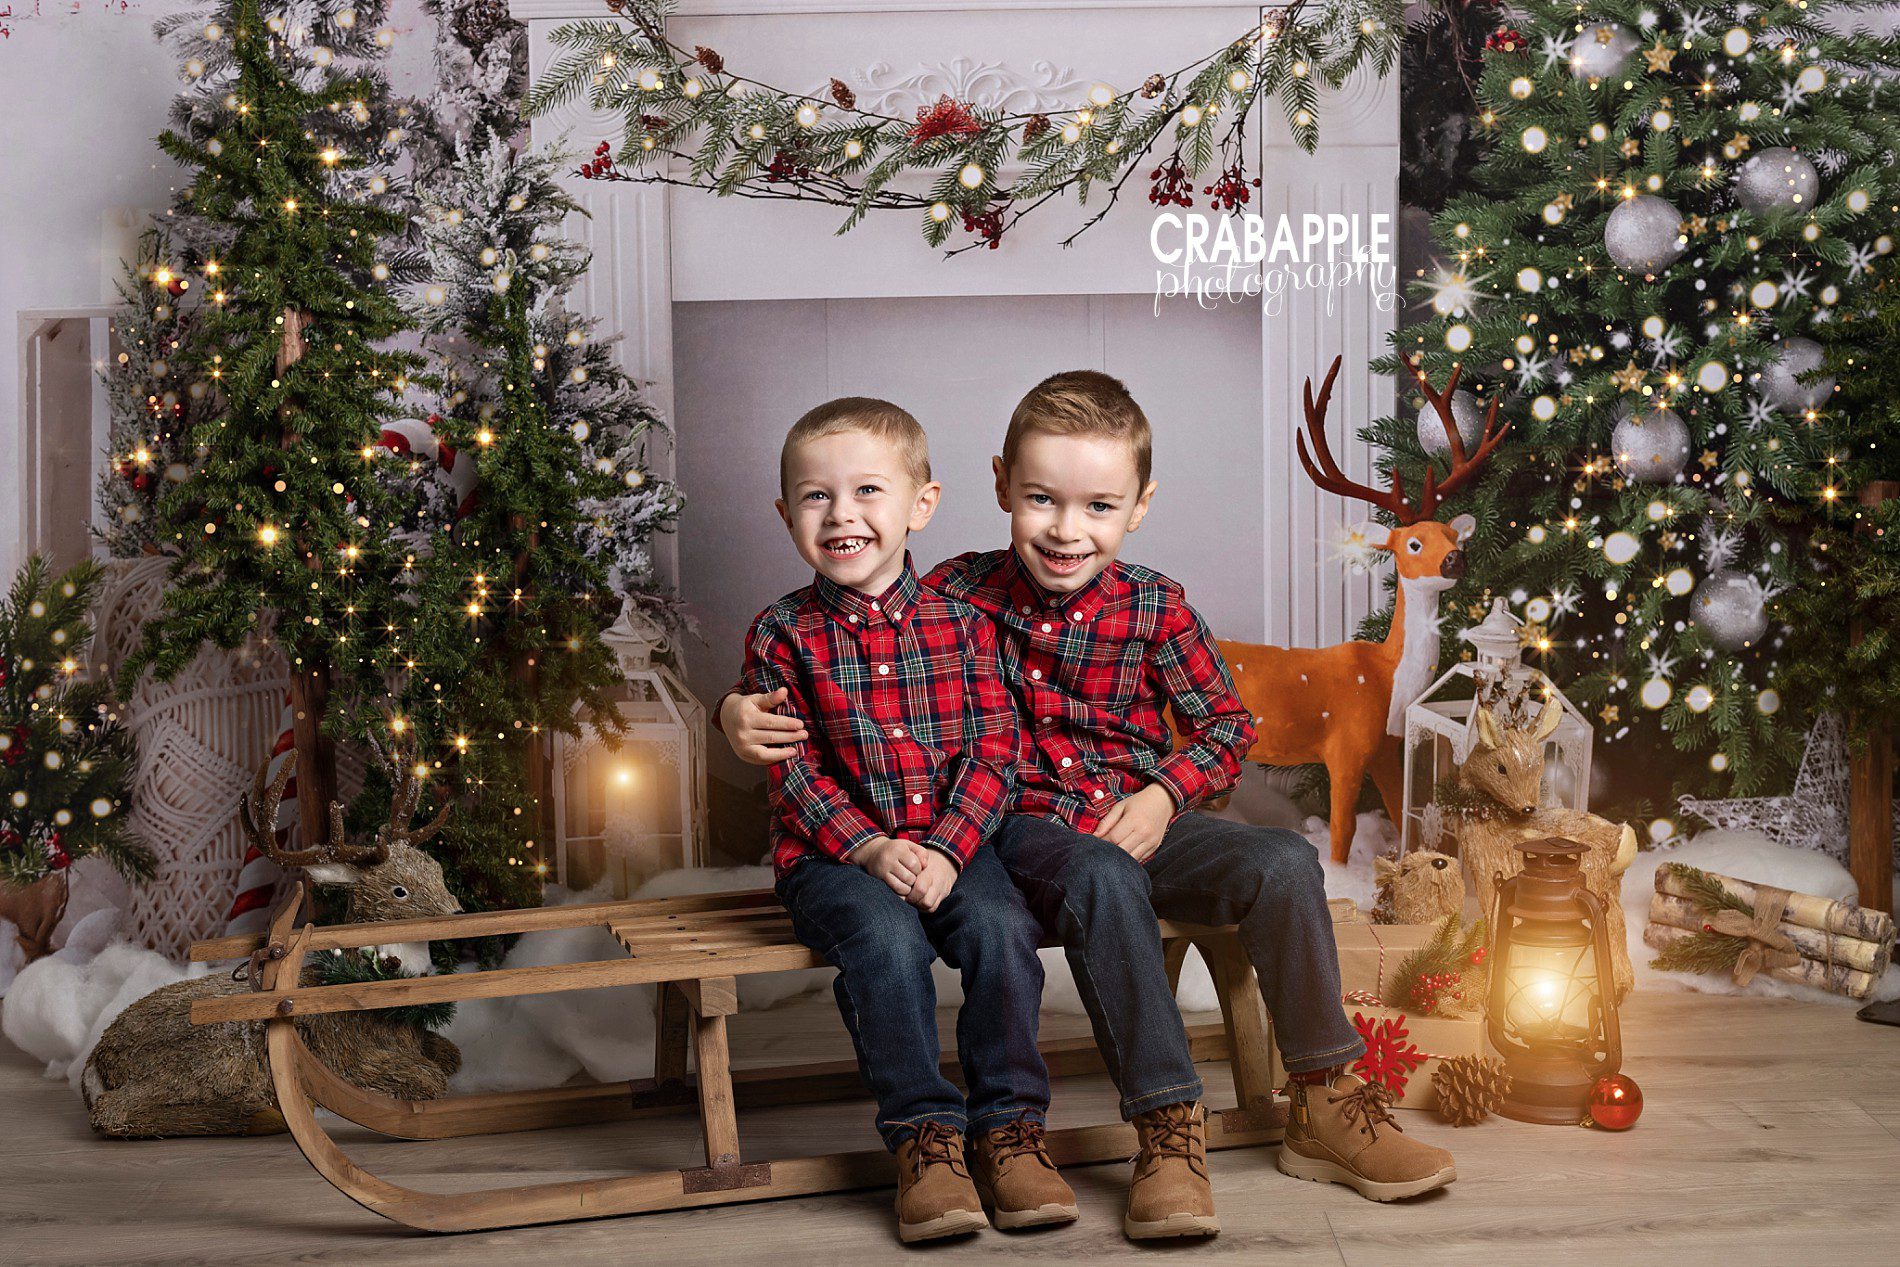 formal outfit ideas for brothers for christmas photos